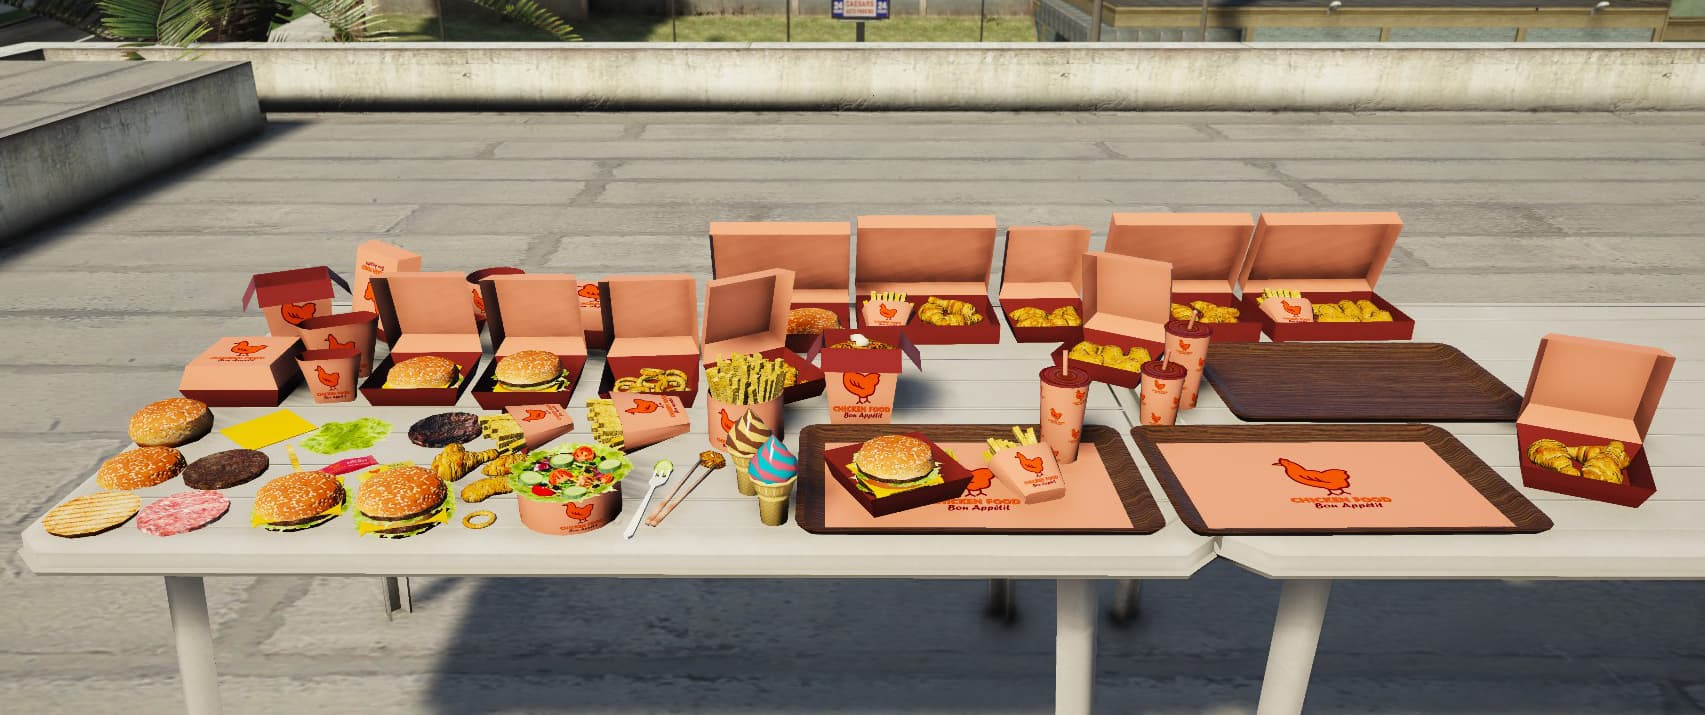 [PROPS] Fast food (50x prop + 2x animation) - Releases - Cfx.re Community